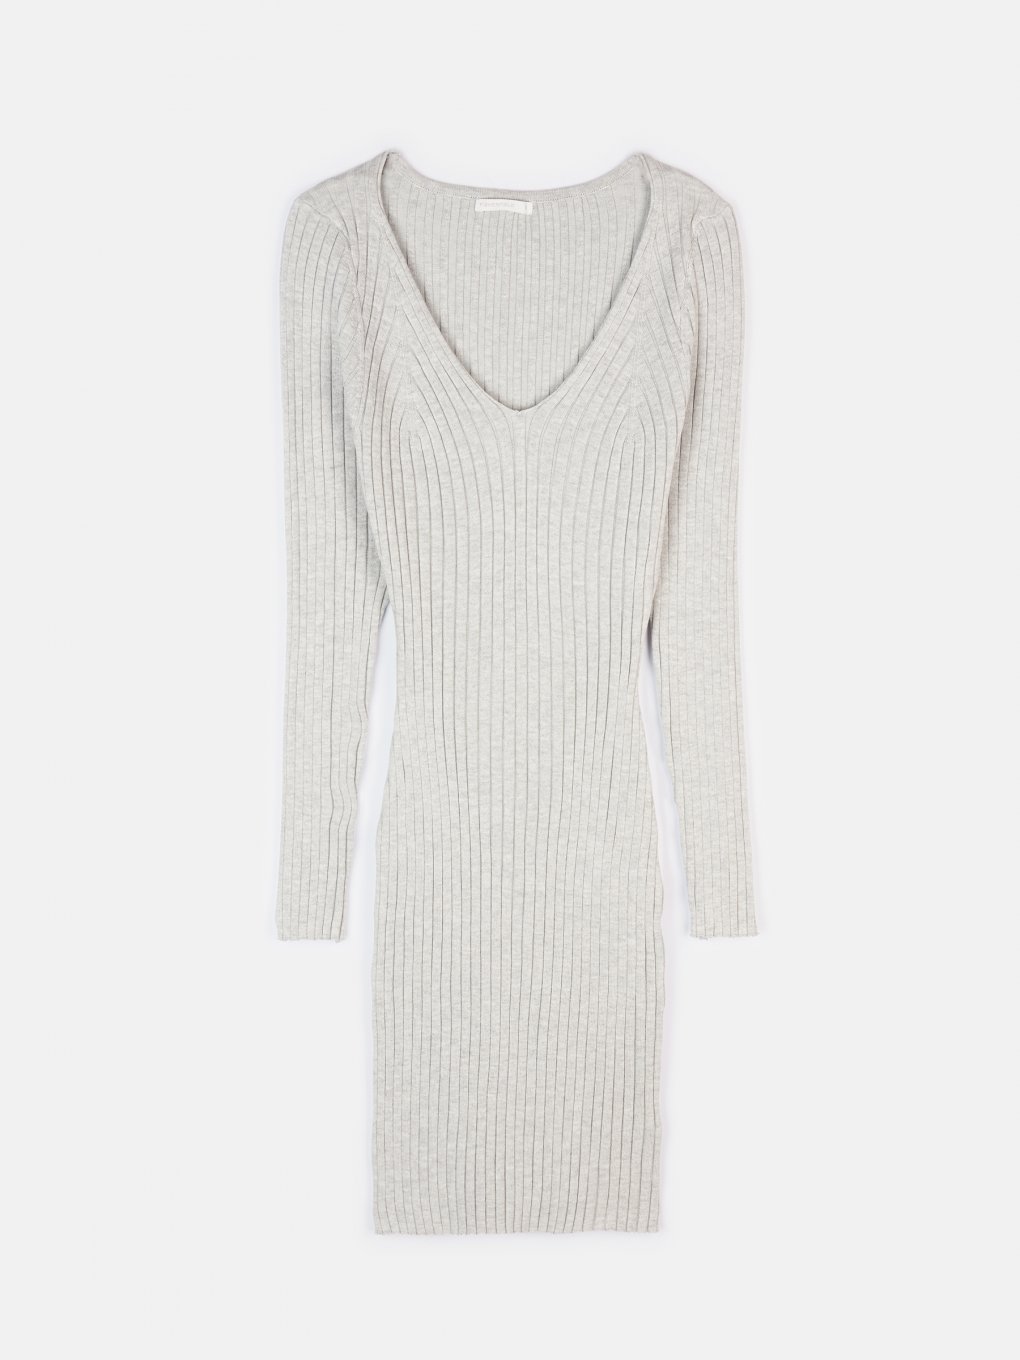 Knitted bodycon dress